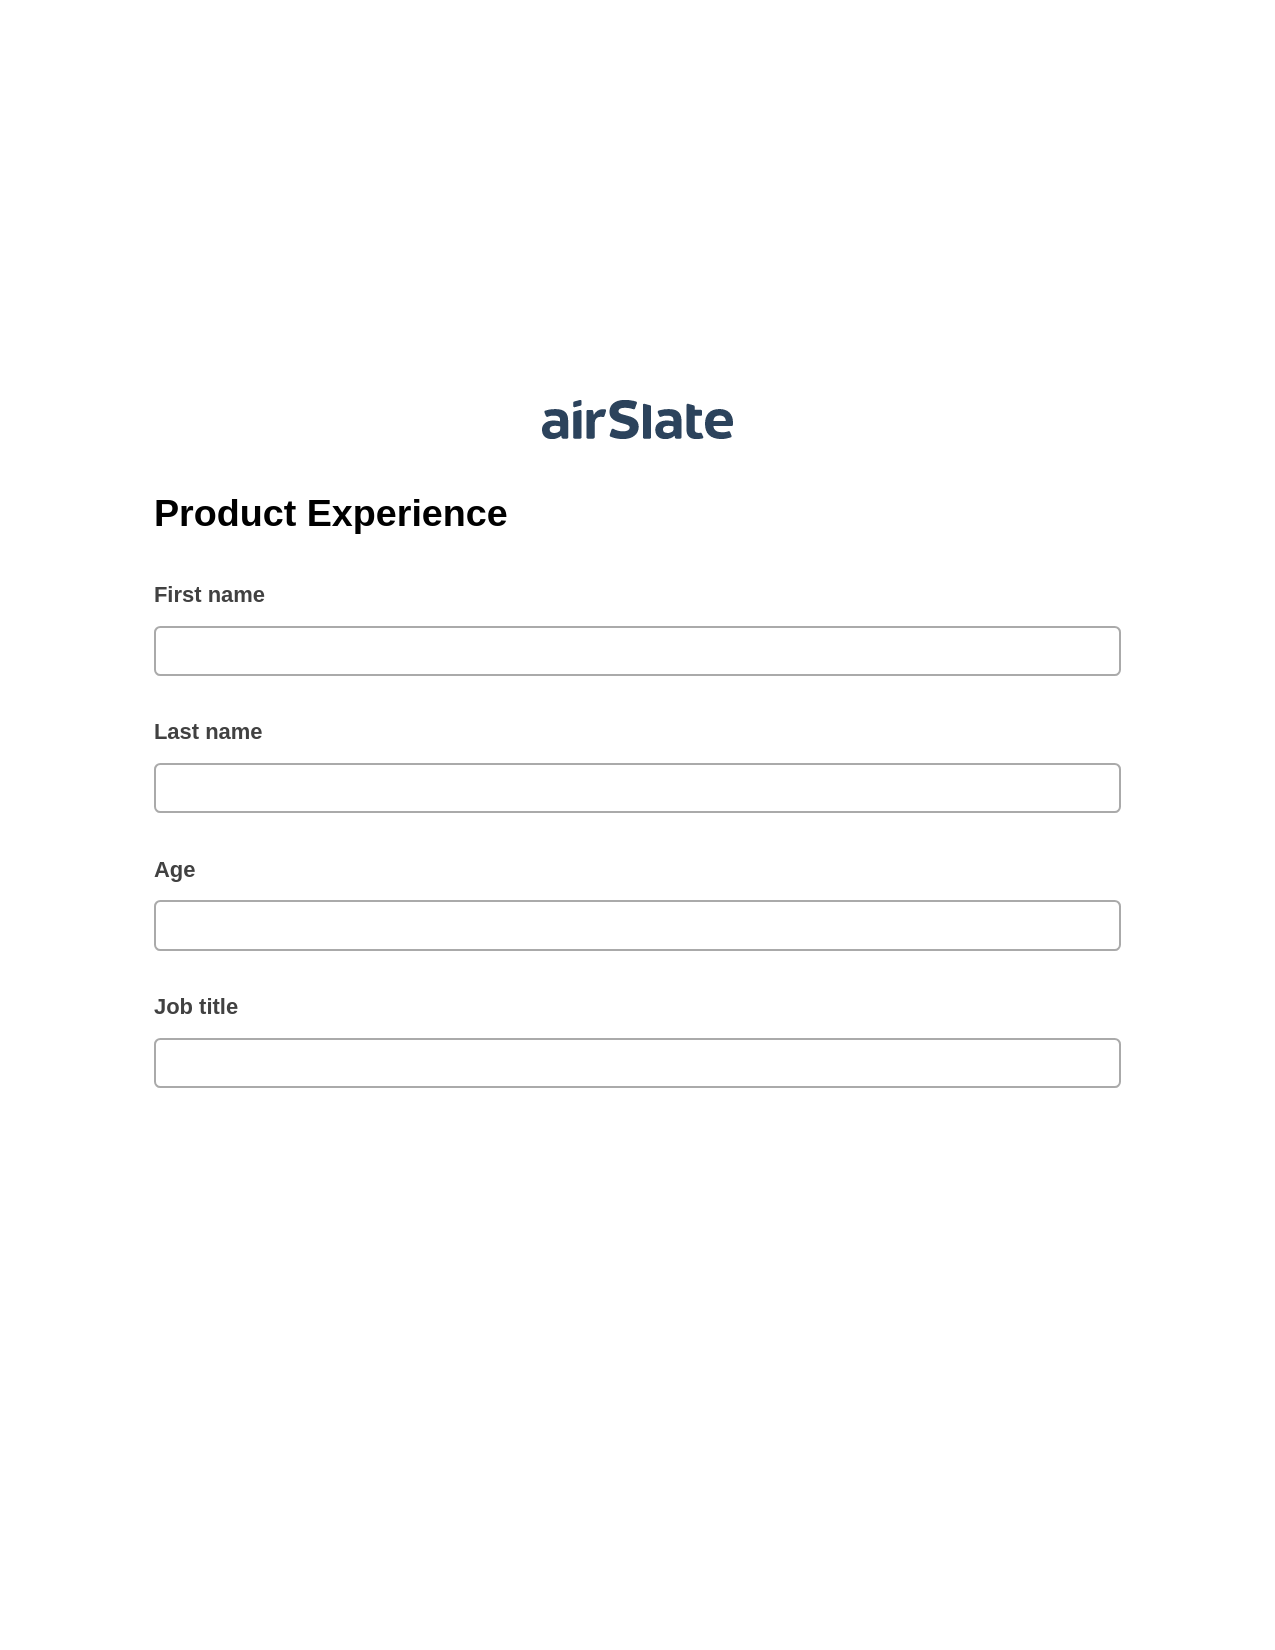 Product Experience Pre-fill from Salesforce Records with SOQL Bot, Update Salesforce Records Bot, Export to WebMerge Bot